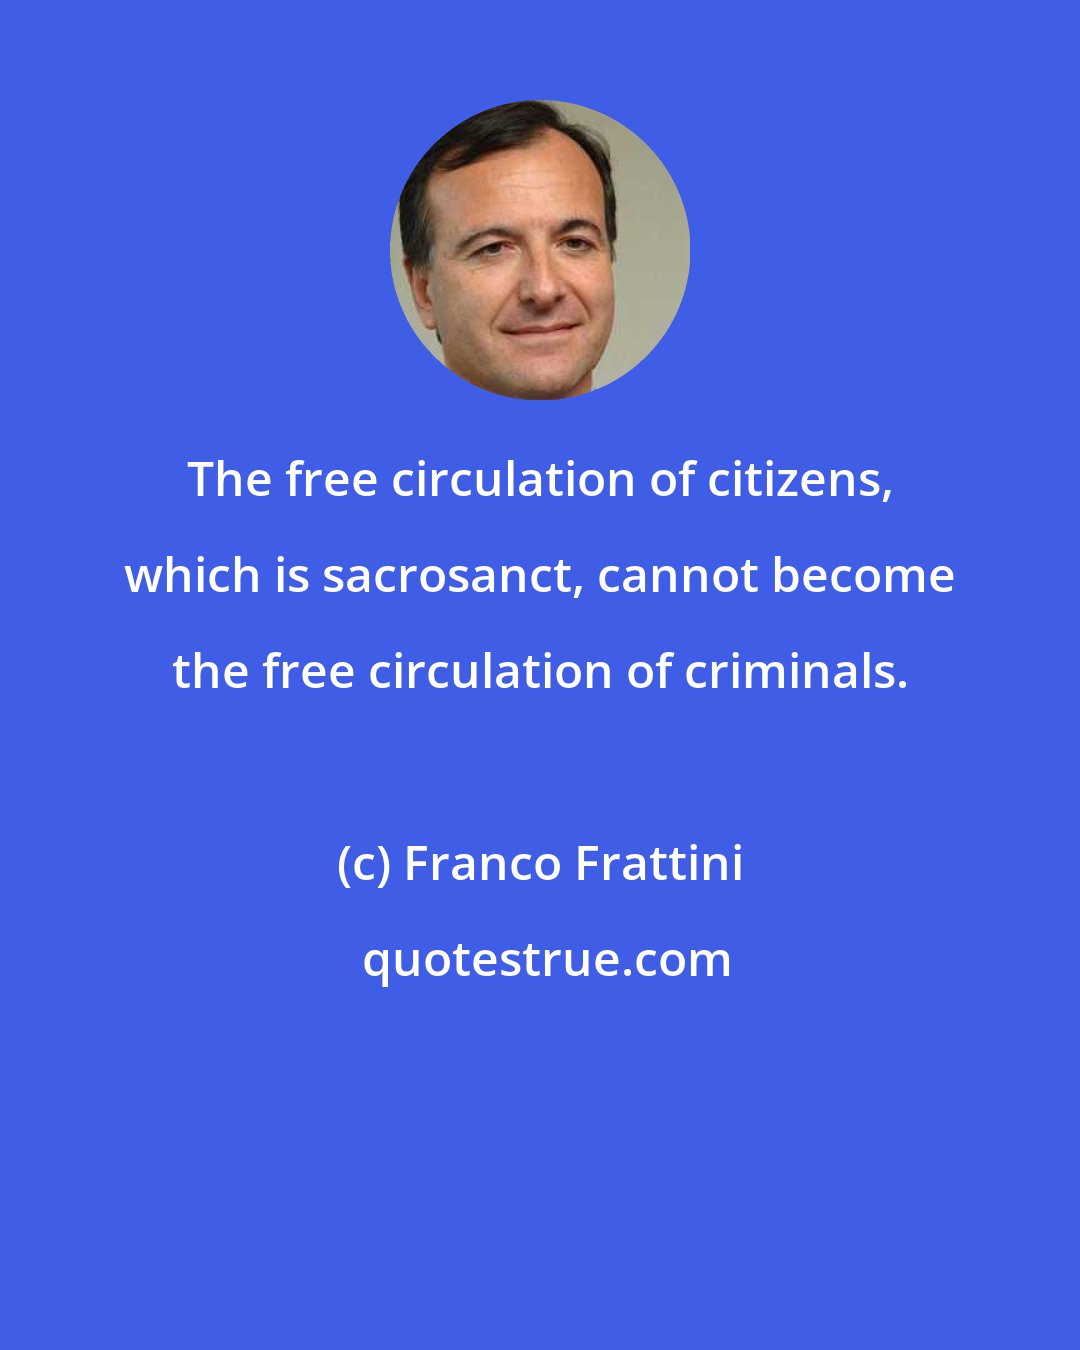 Franco Frattini: The free circulation of citizens, which is sacrosanct, cannot become the free circulation of criminals.